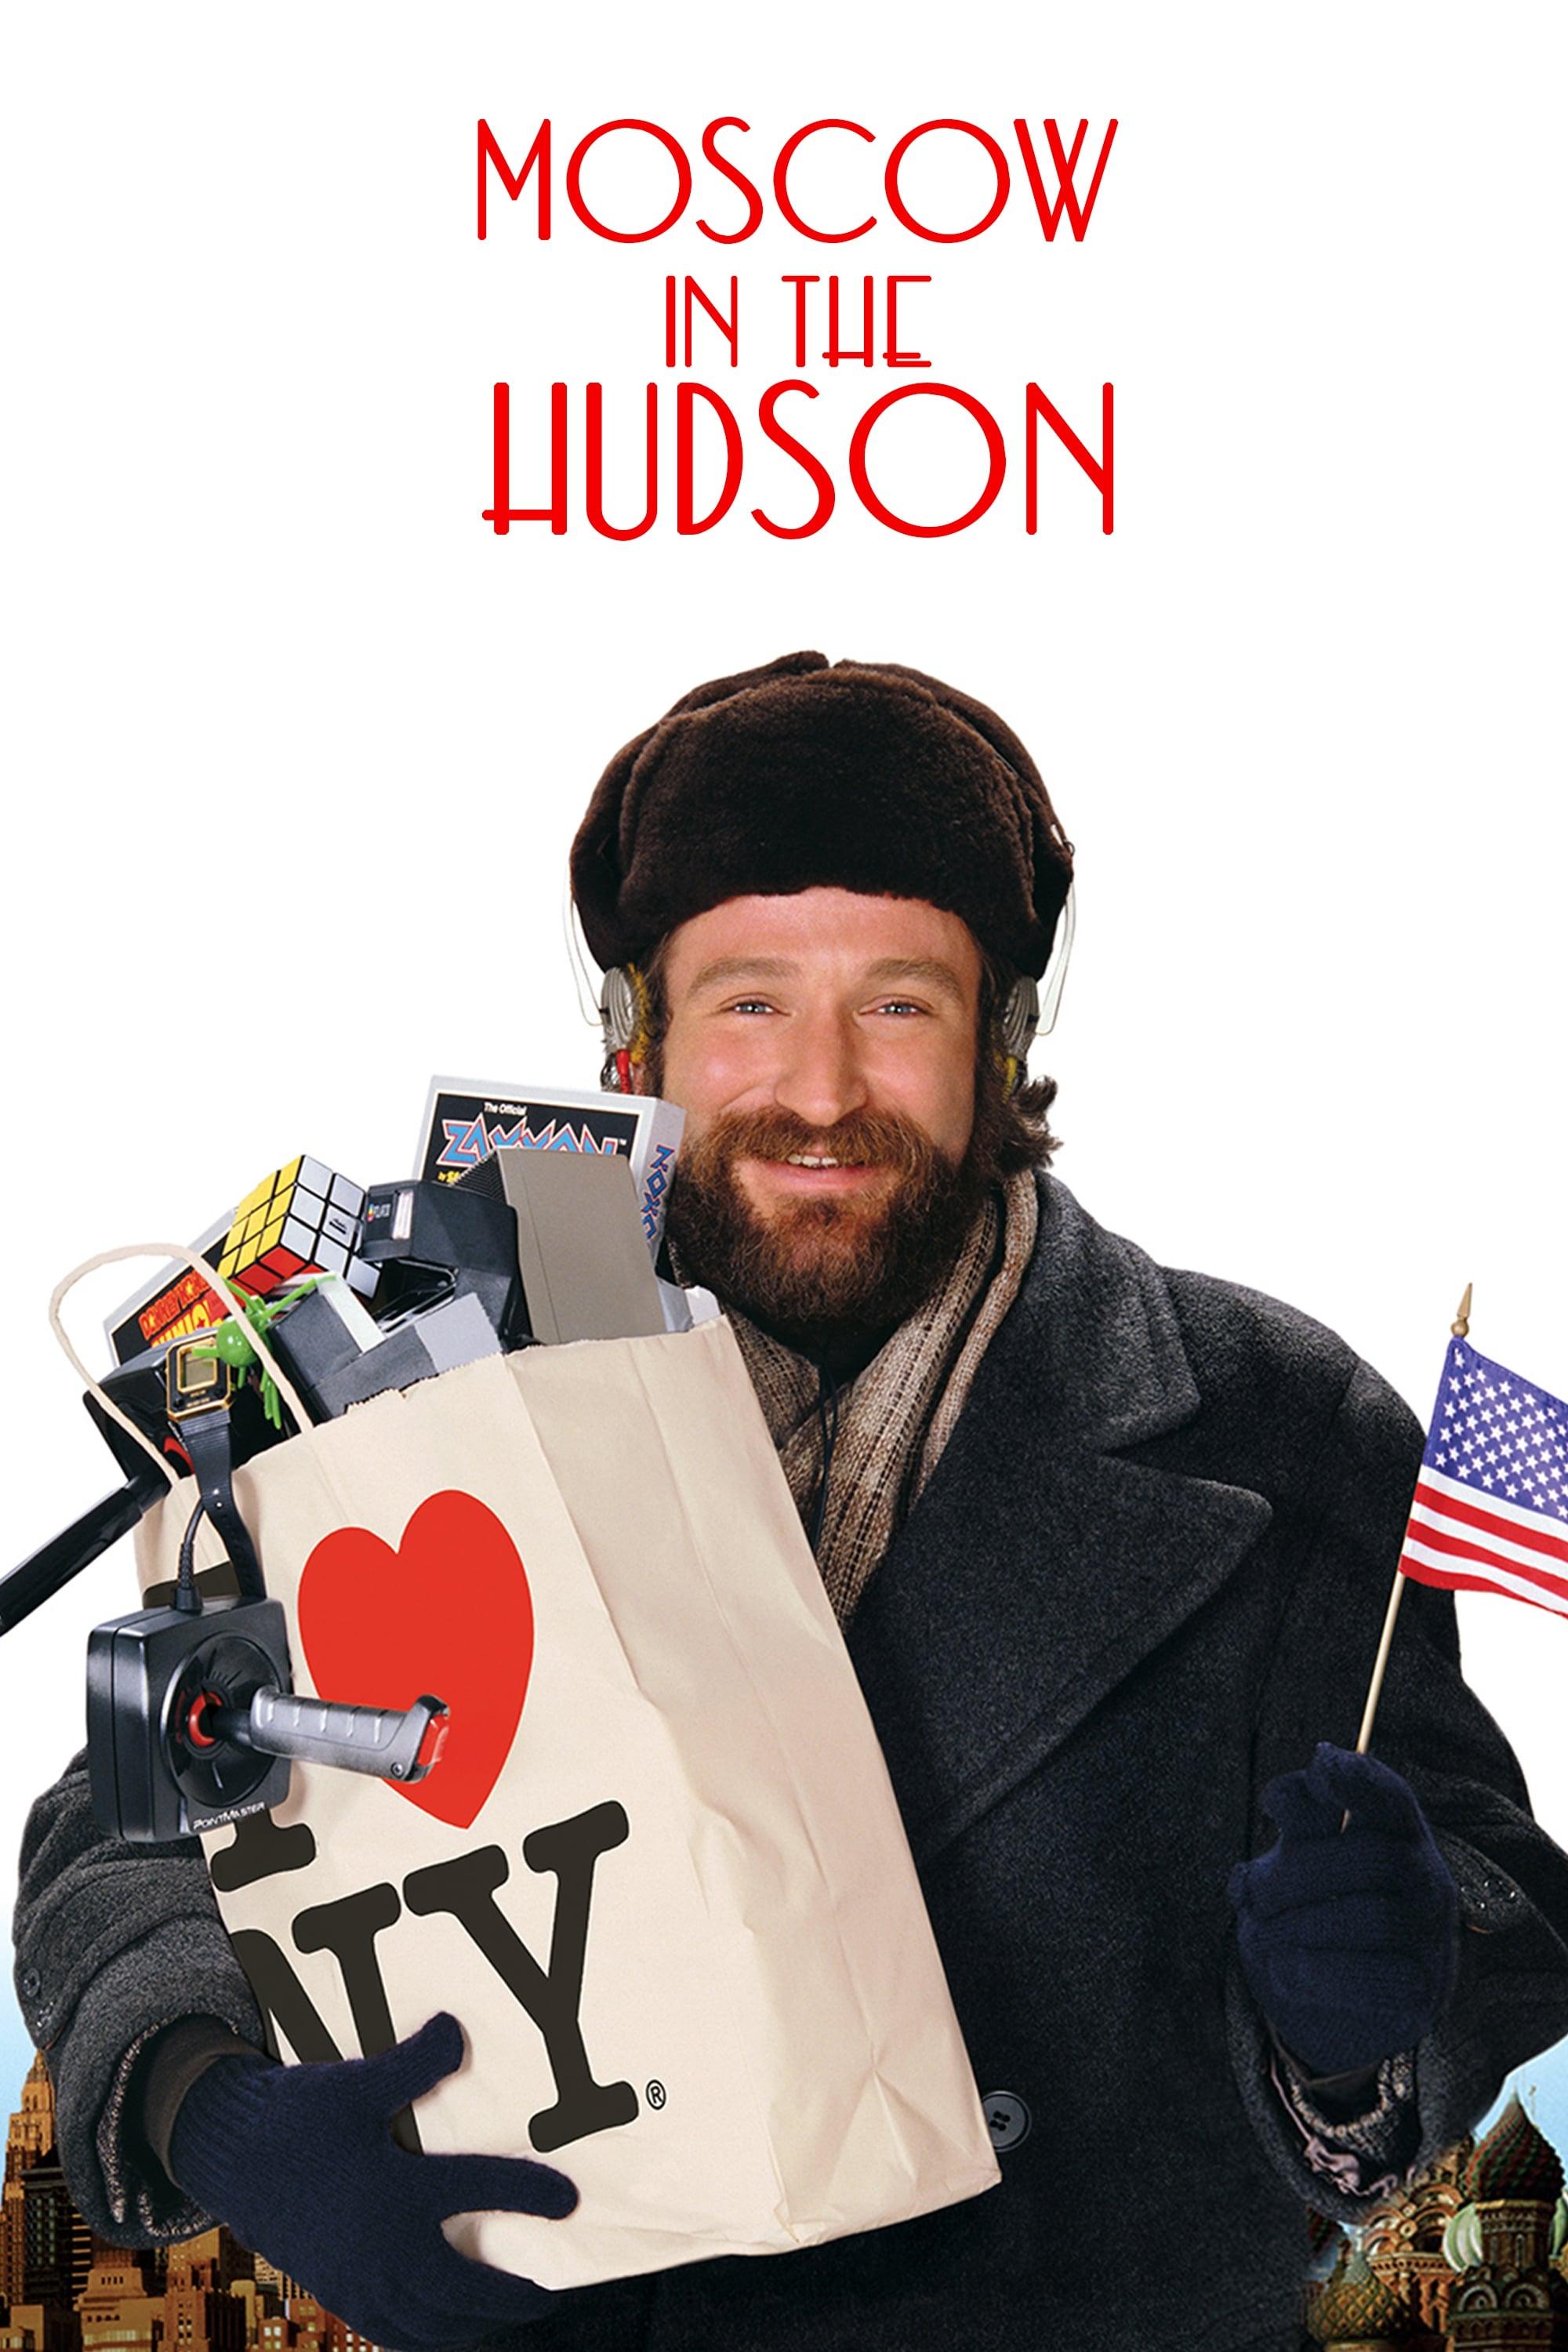 Moscow on the Hudson poster